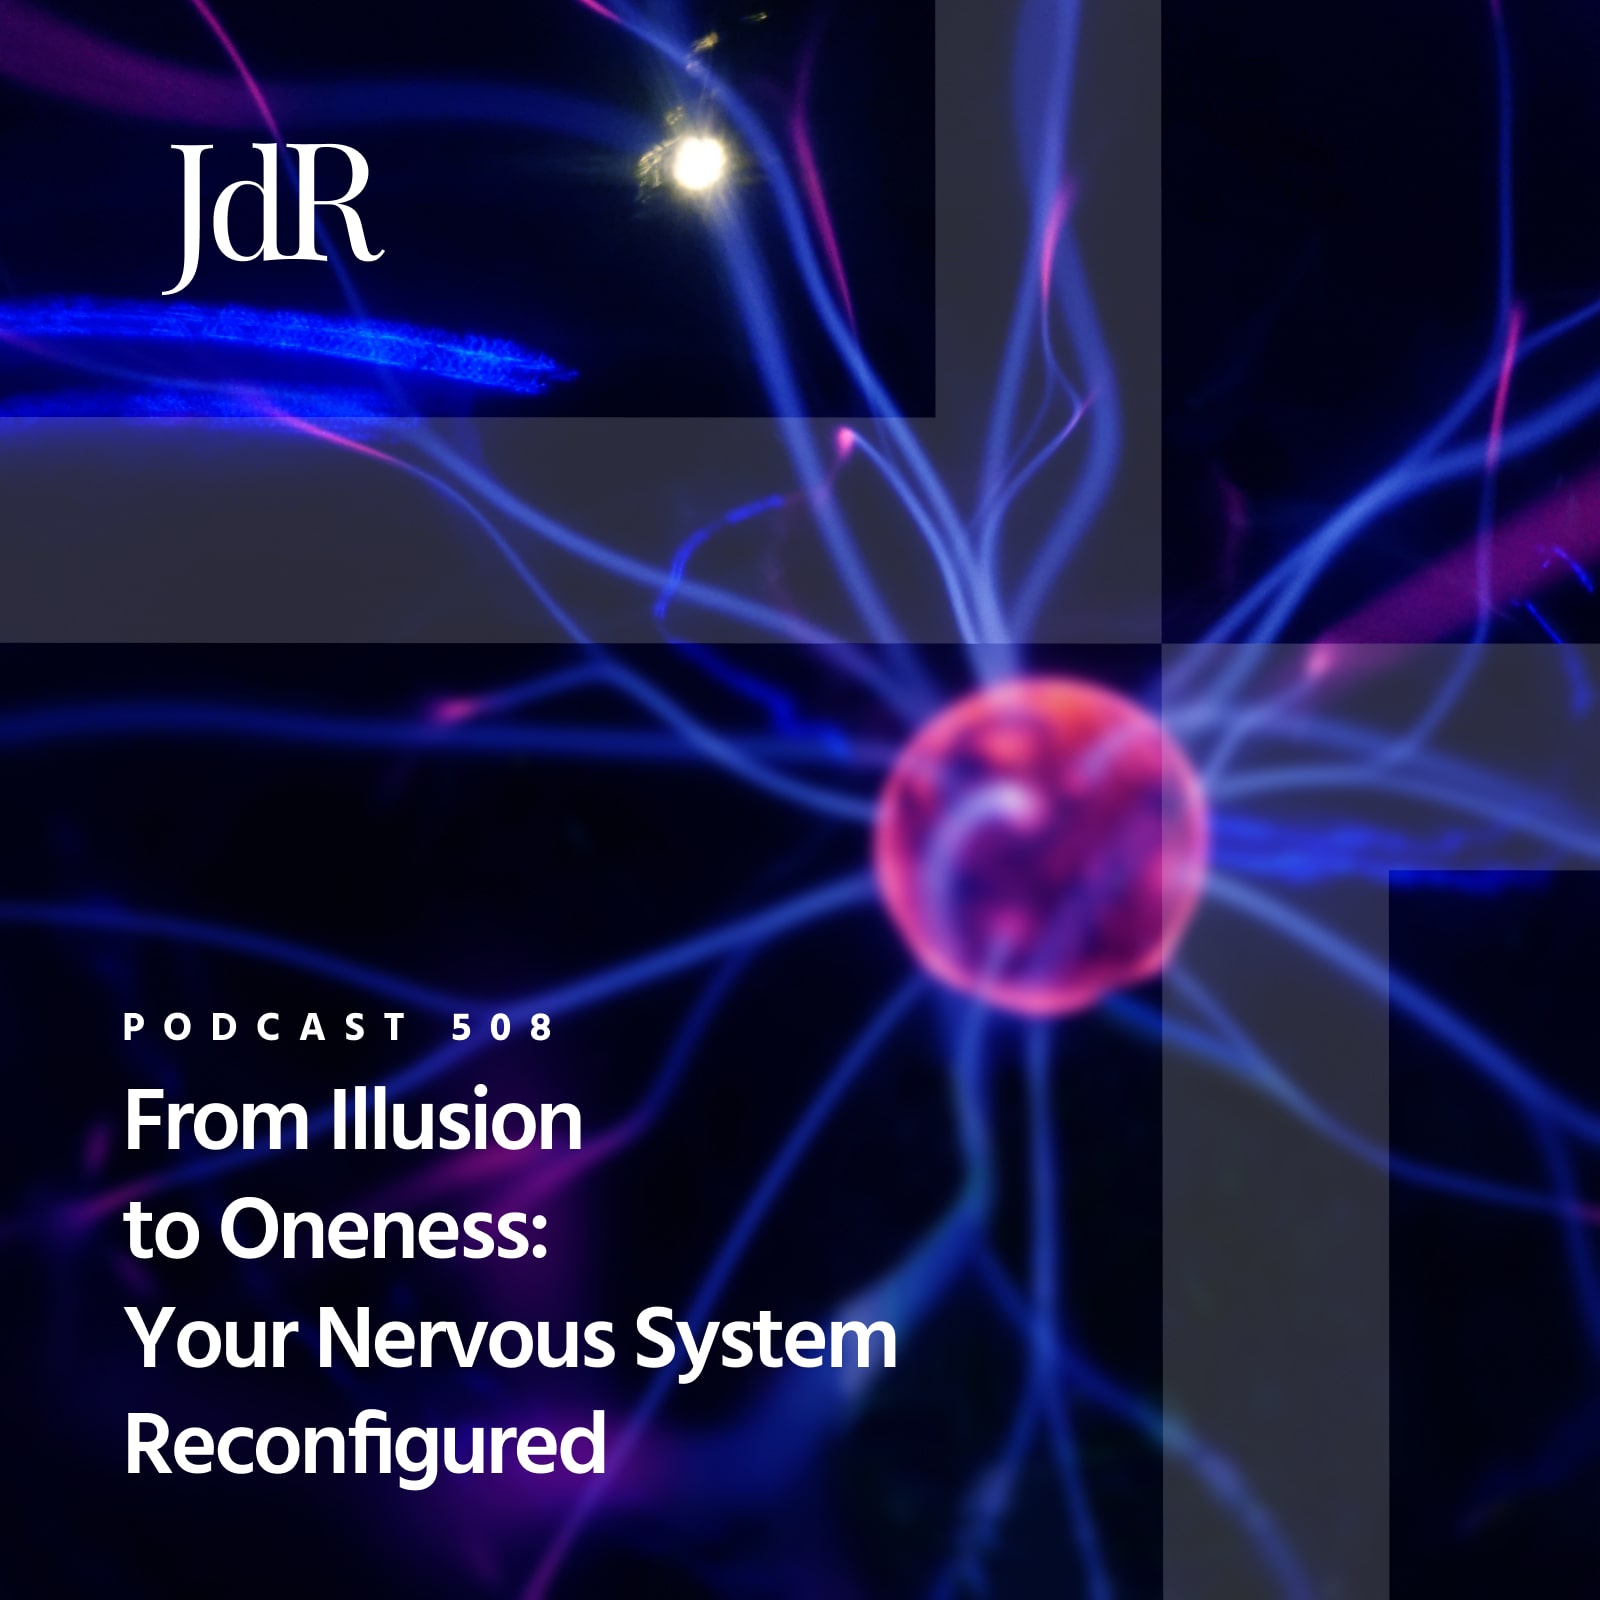 From Illusion to Oneness: Your Nervous System Reconfigured - John de Ruiter